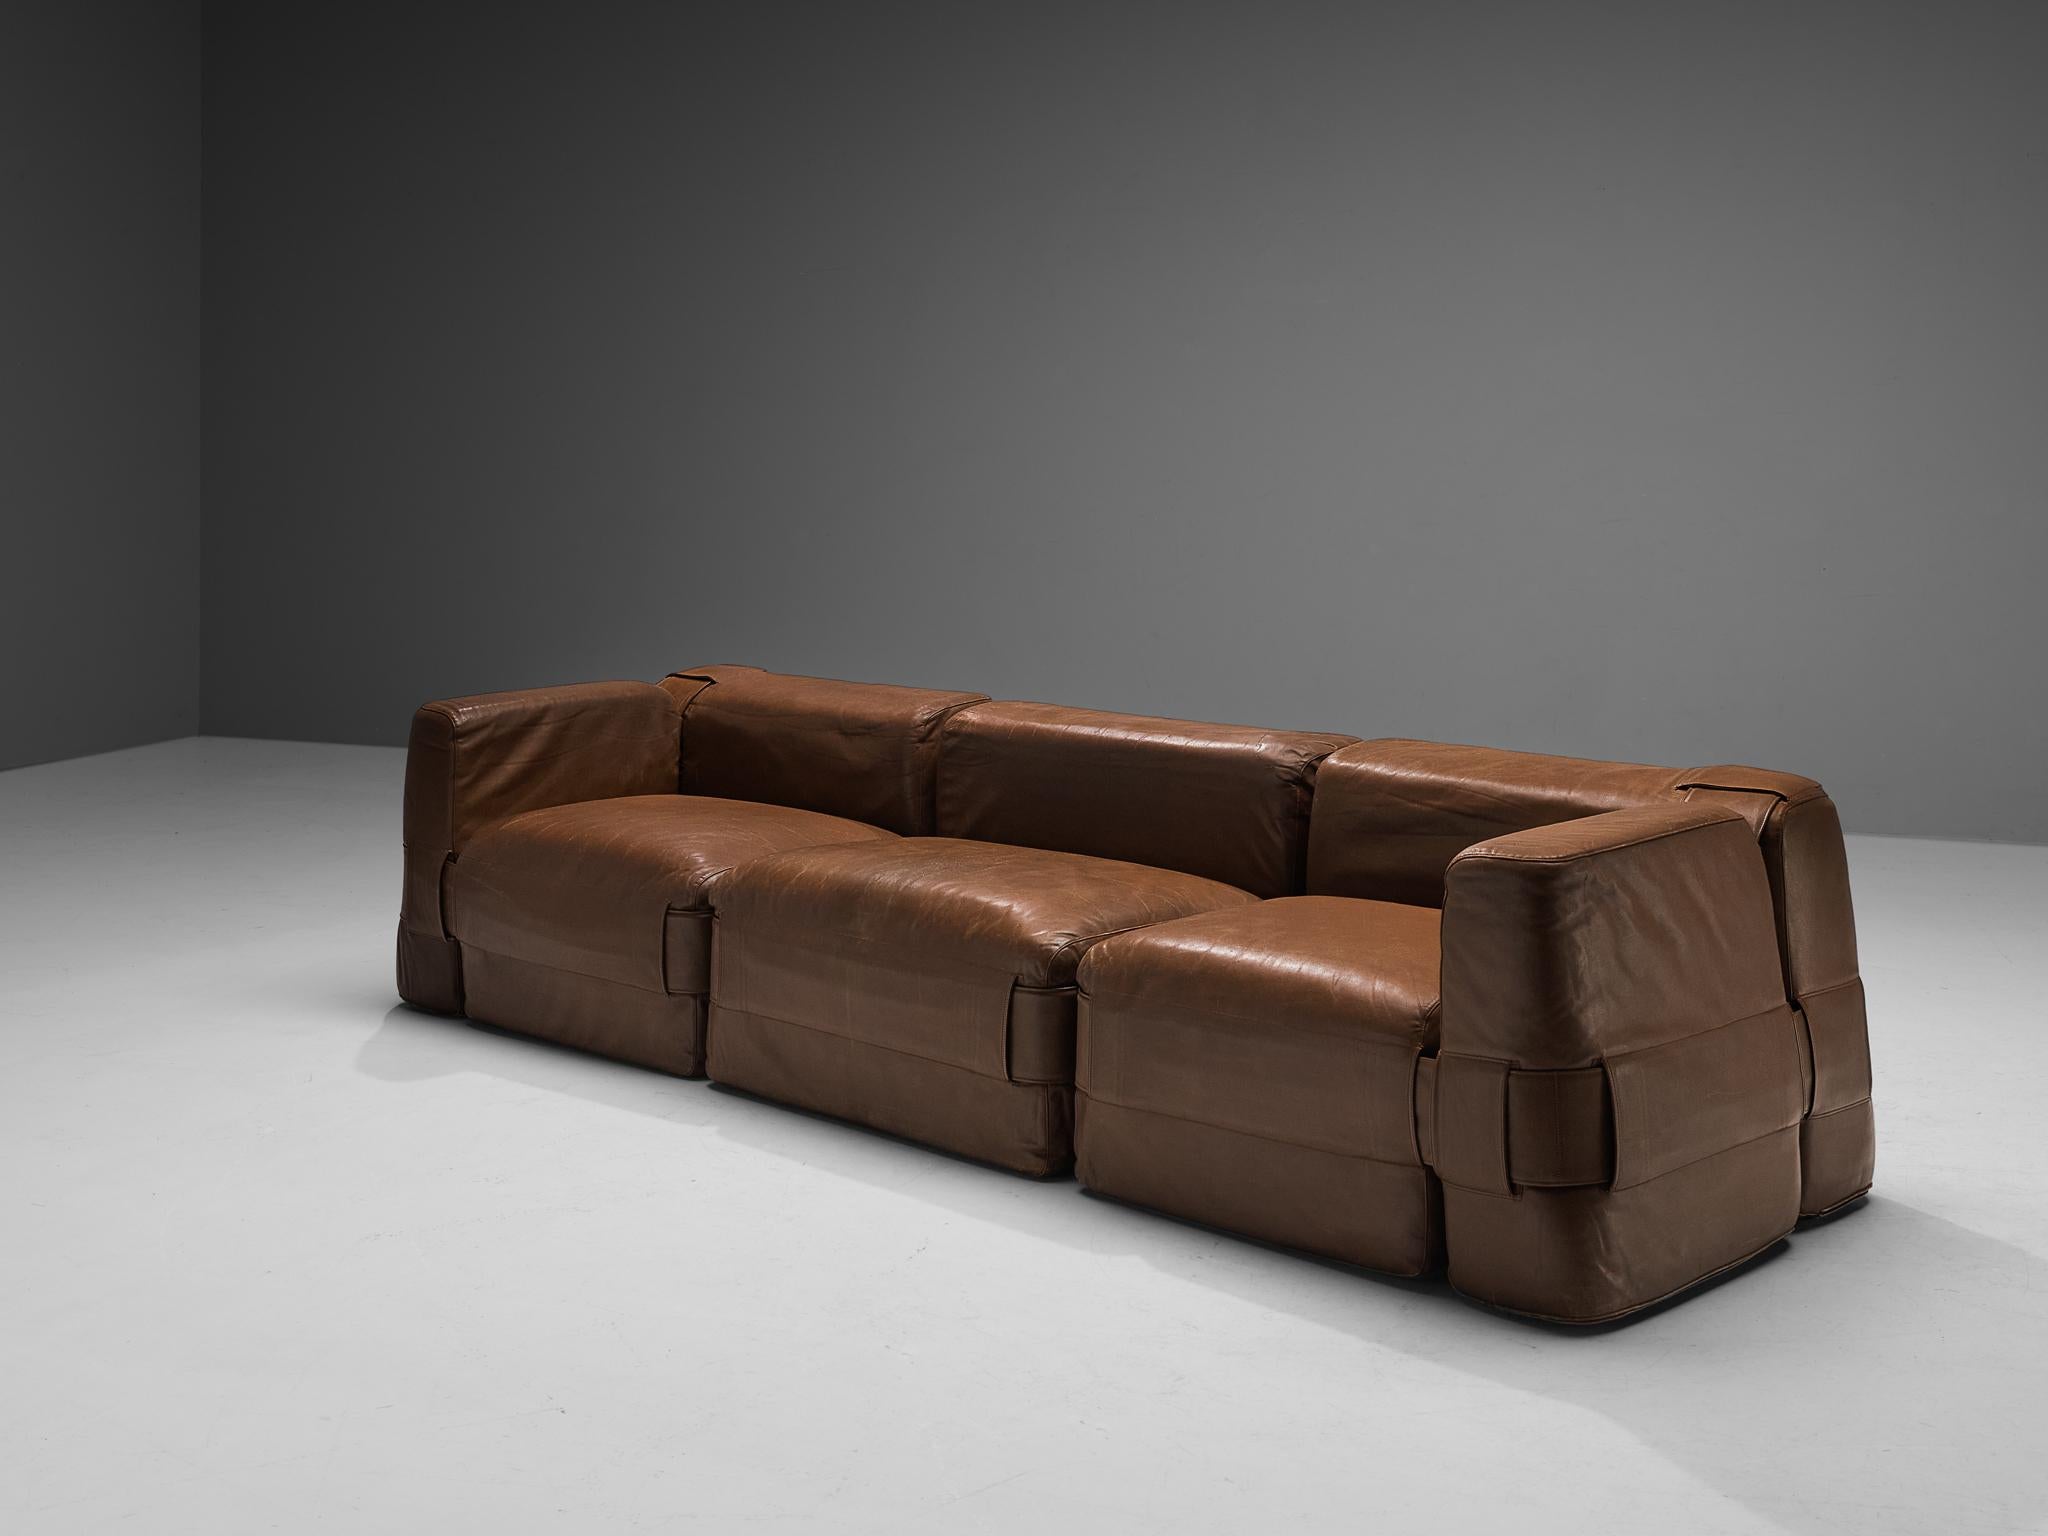 Mario Bellini for Cassina, 'Quartet' sofa model 932, leather, metal, Italy, 1964

Mario Bellini designed this modular sofa for Cassina. The sofa is a reinterpretation of classic furniture that always uses padded cushions. He experimented with these